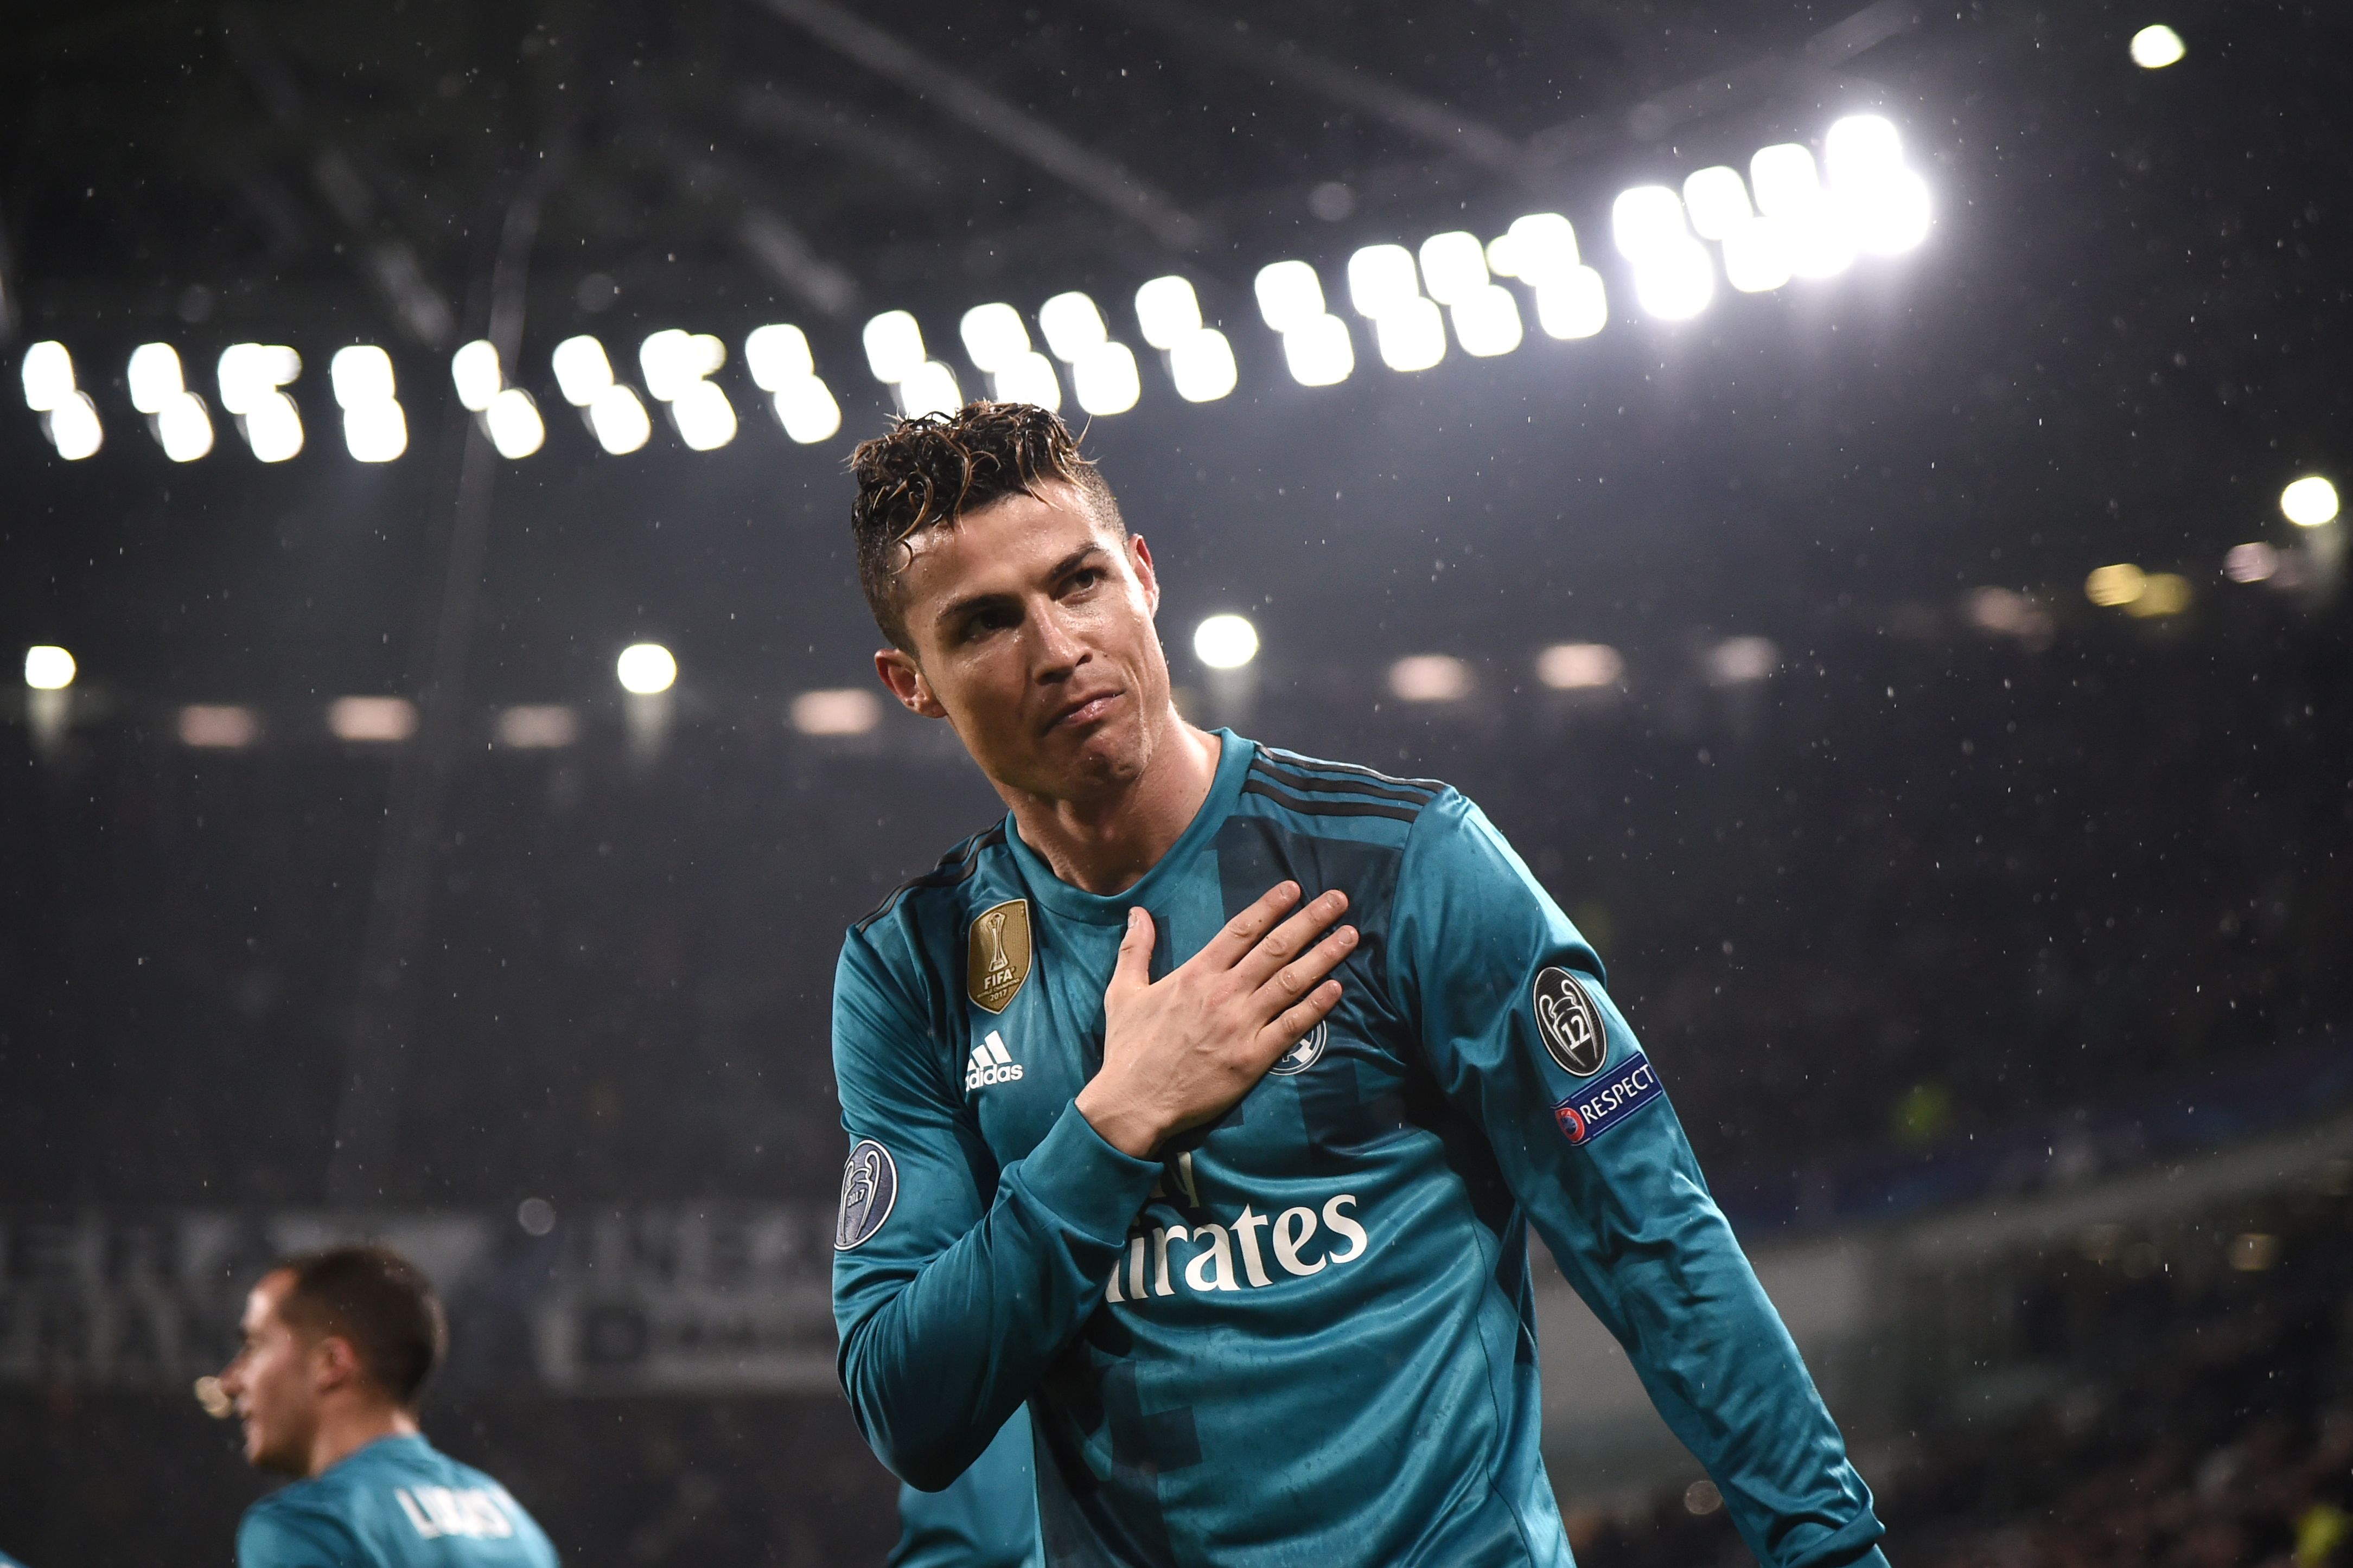 Cristiano Ronaldo Leaving Real Madrid and Joining Juventus